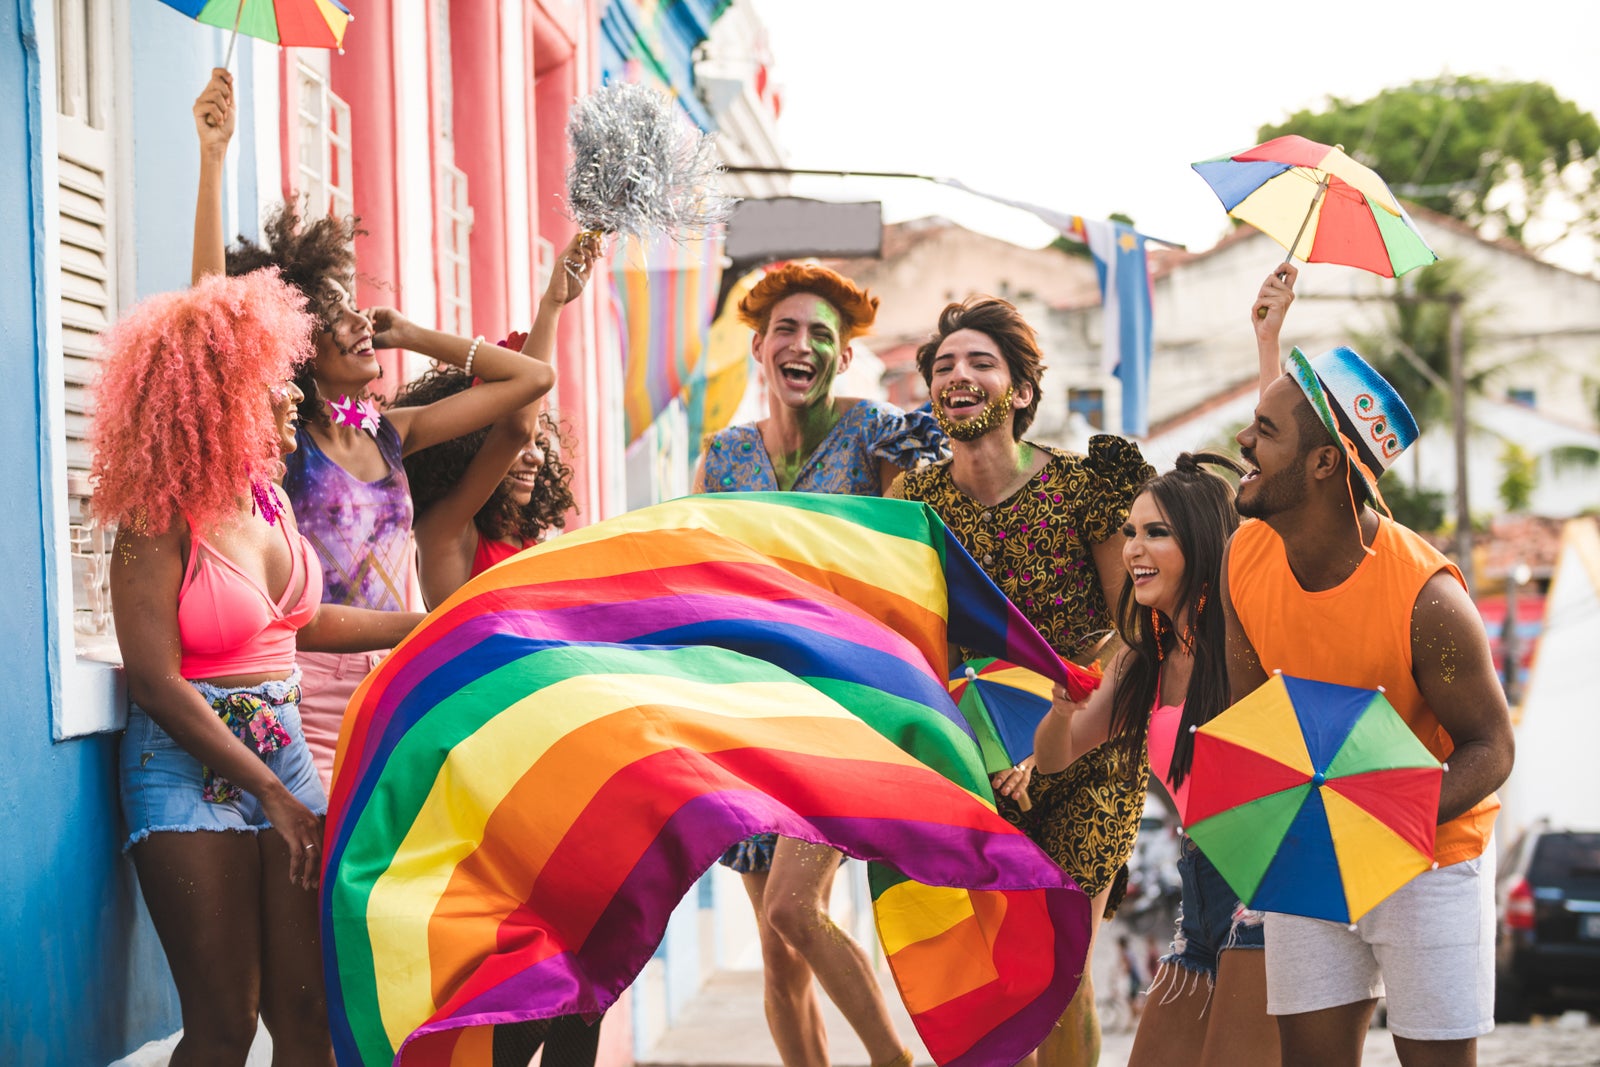 Is carnival cruise lgbt friendly?